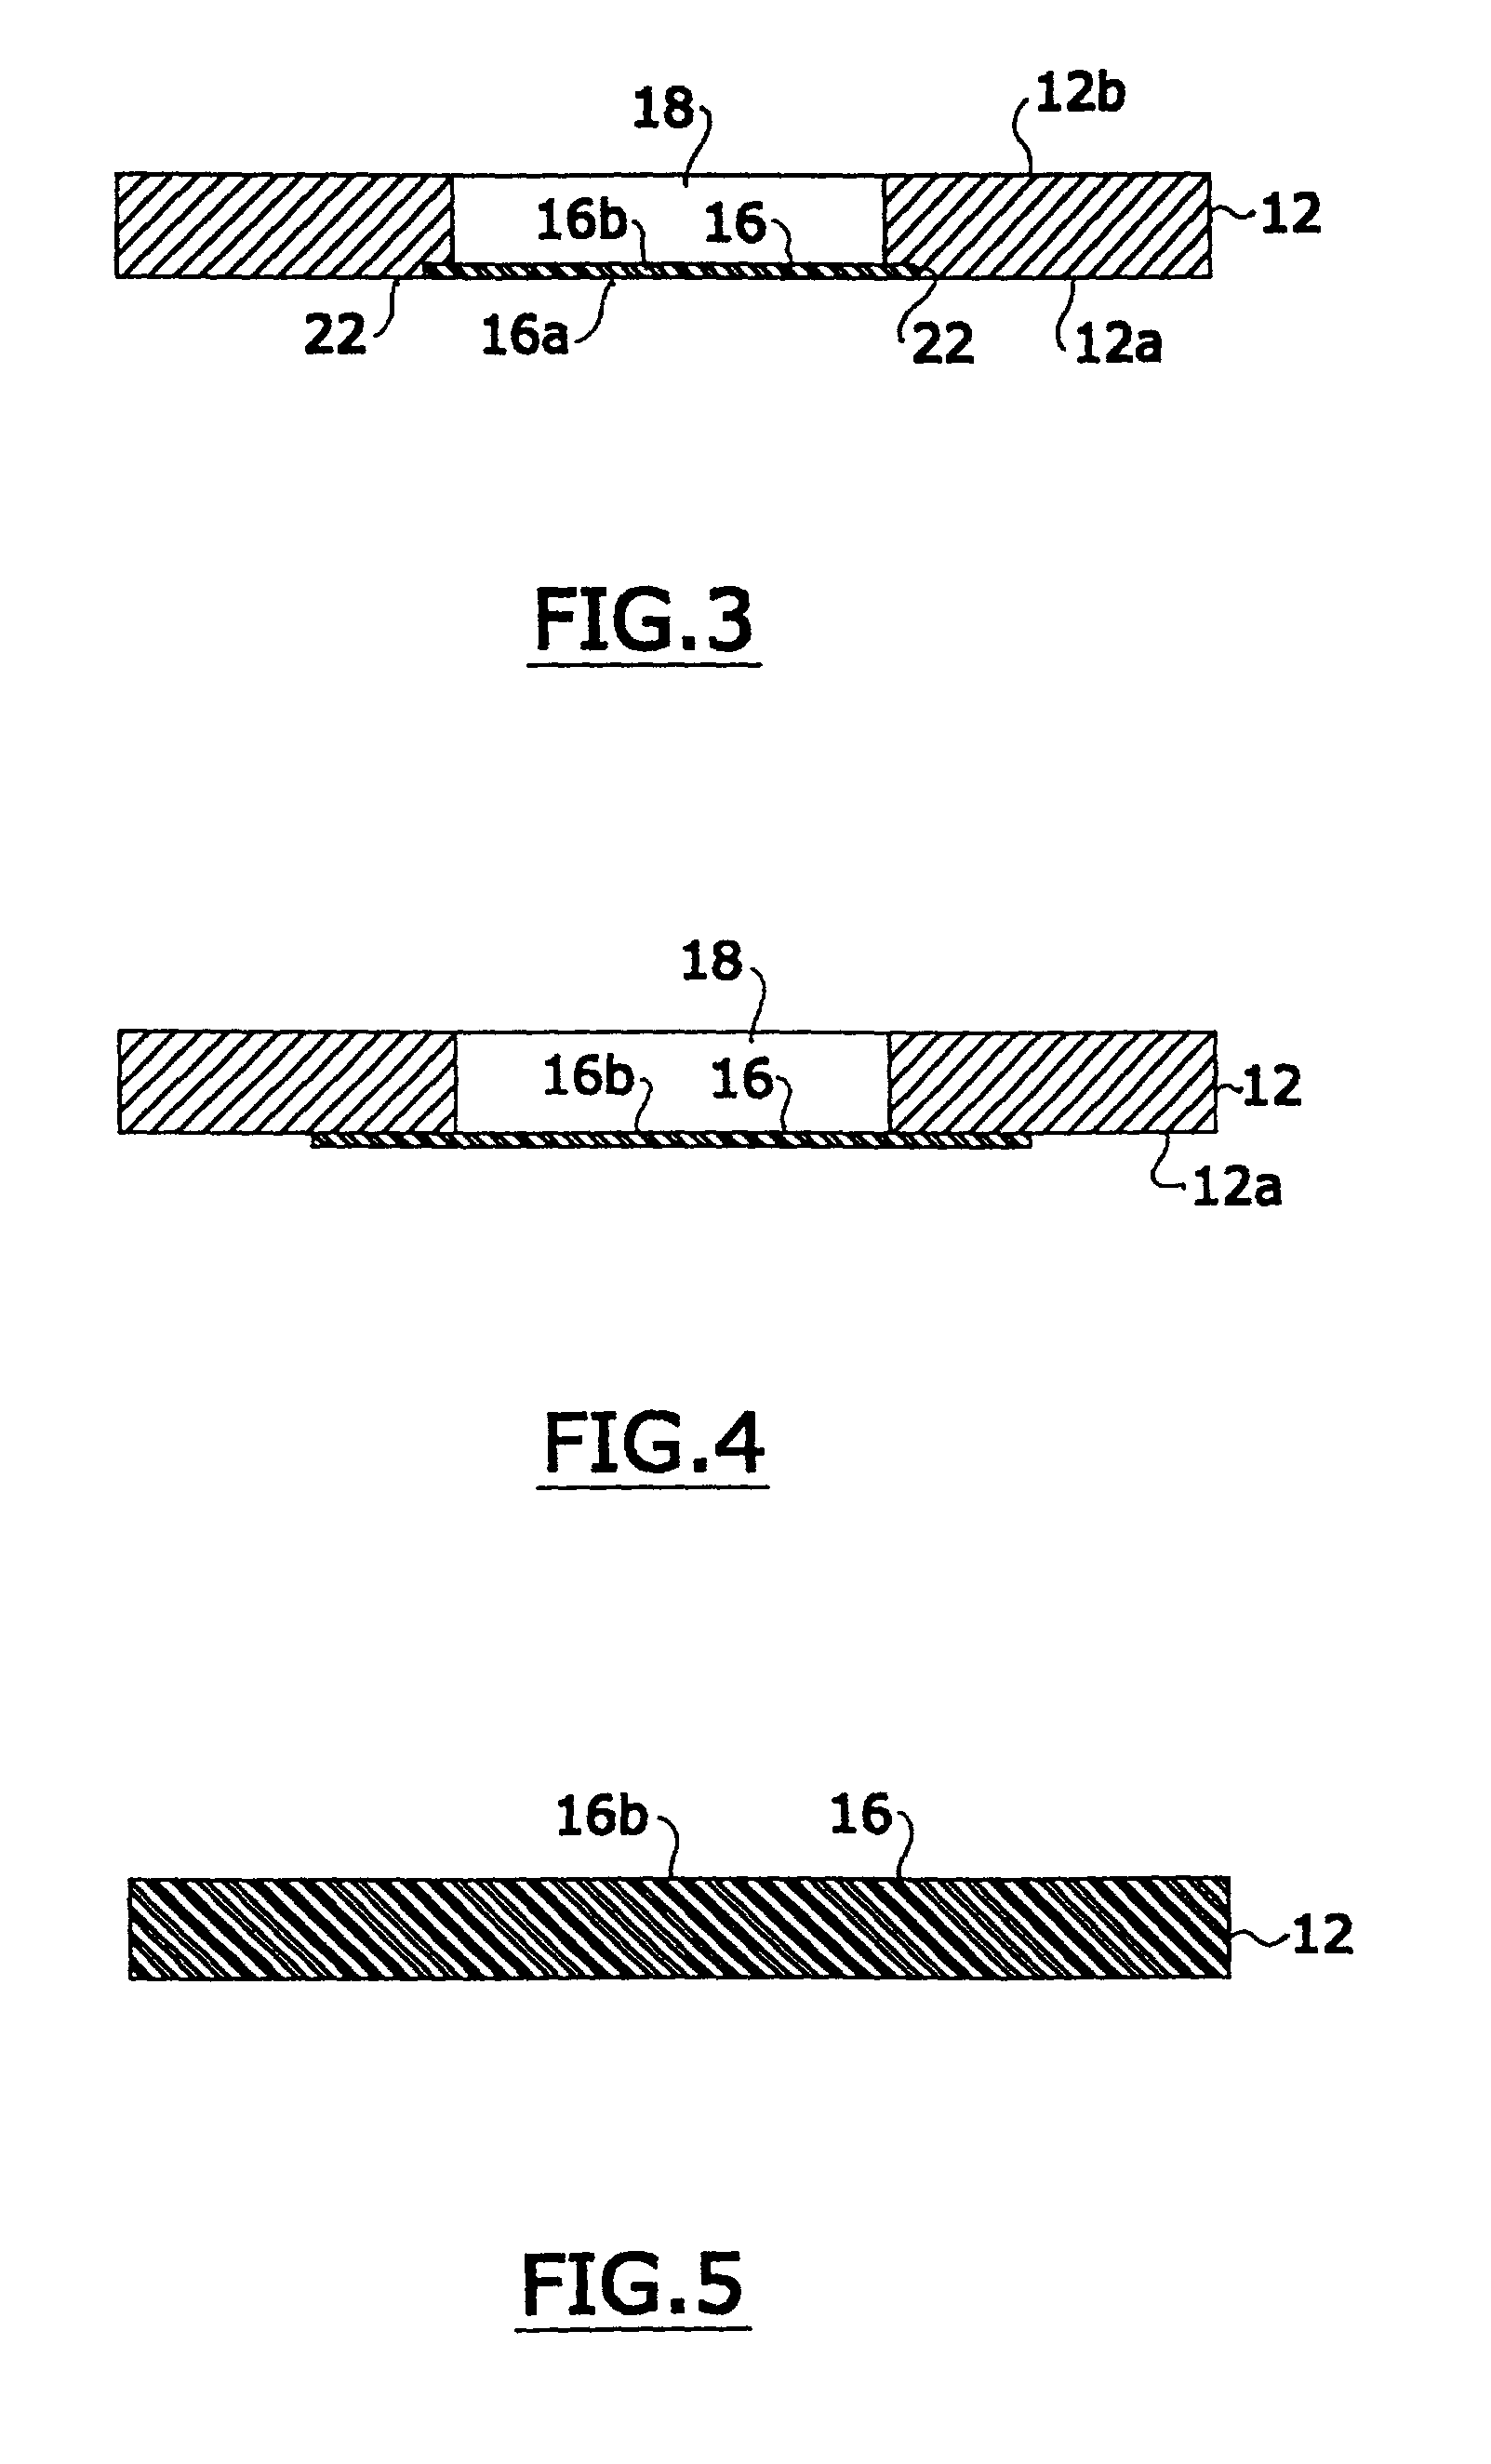 Cassette for facilitating optical sectioning of a retained tissue specimen